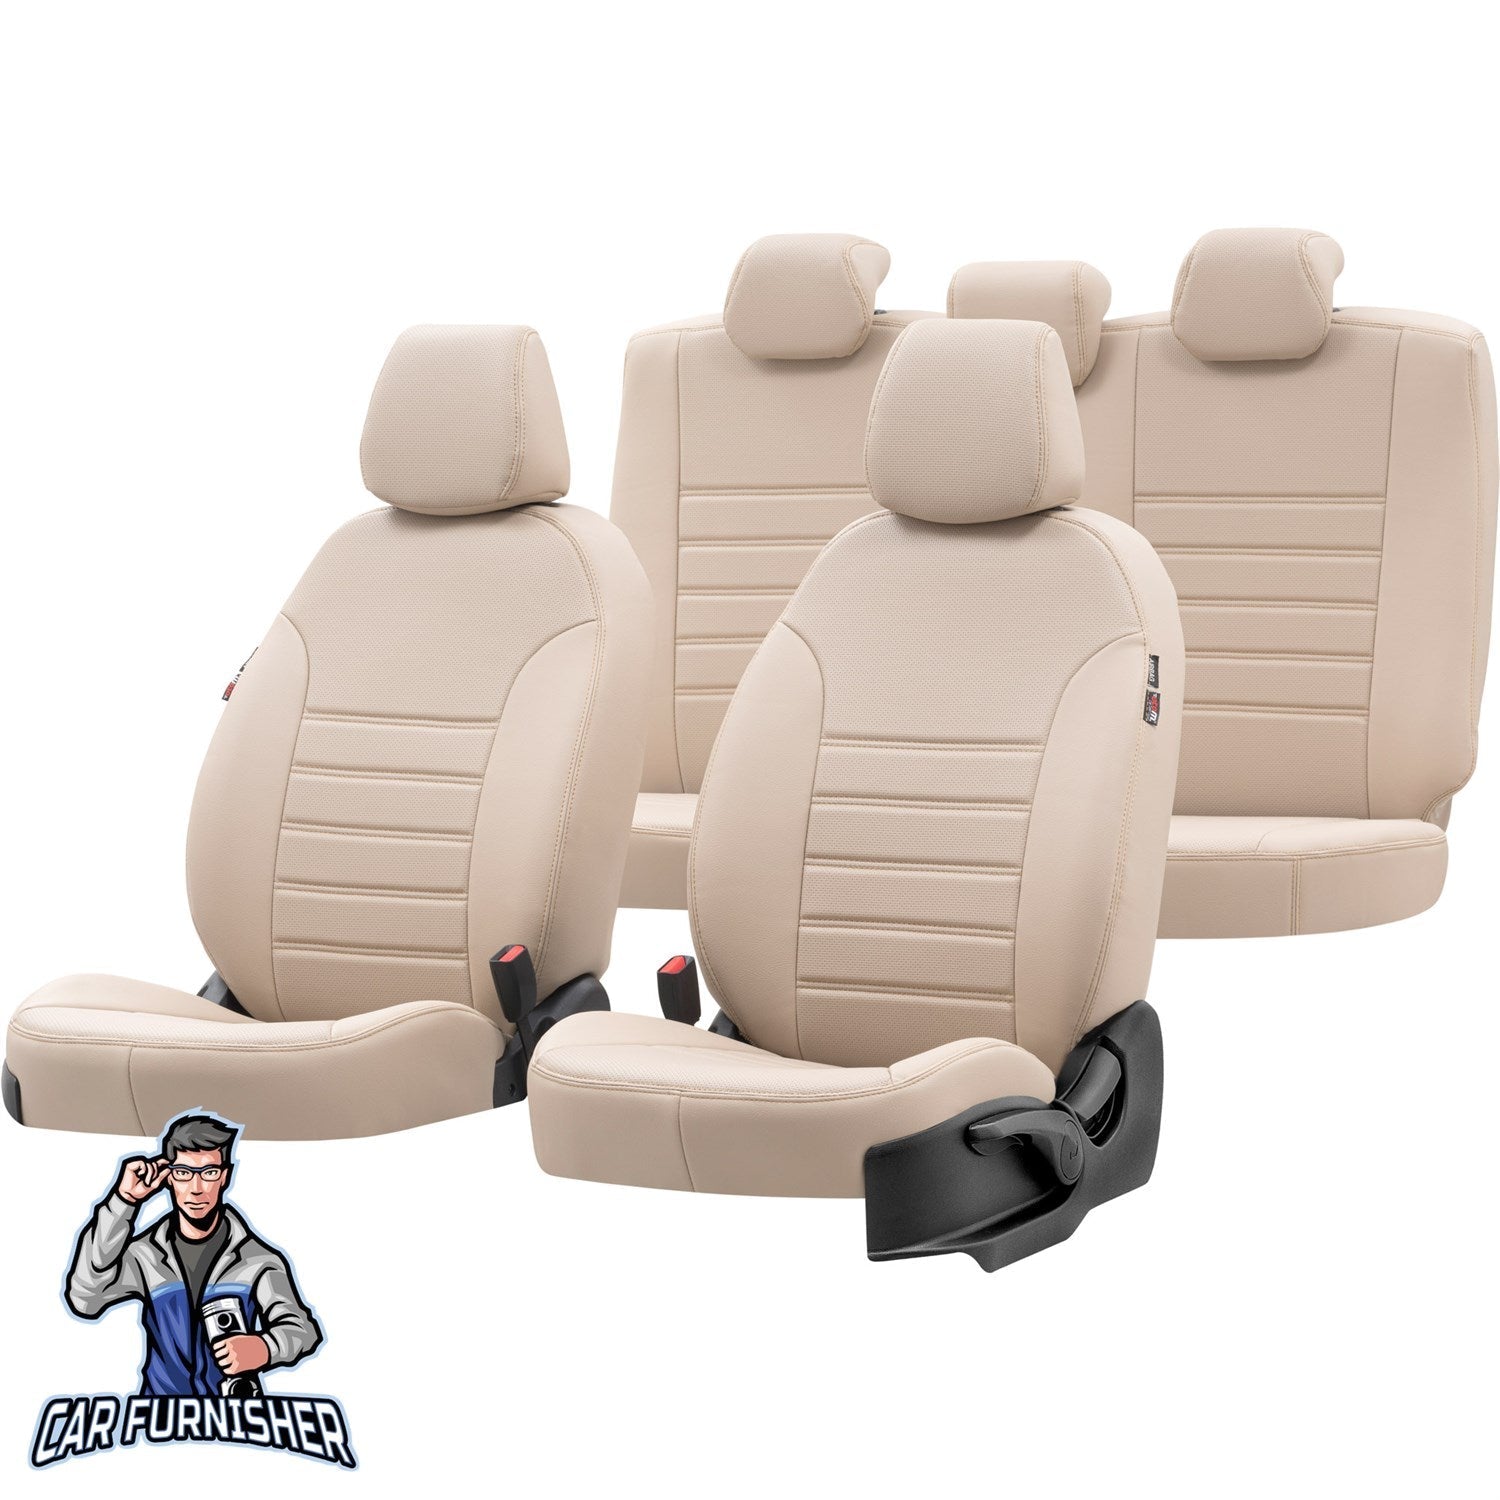 Renault Broadway Car Seat Covers 1983-2001 New York Design Beige Full Set (5 Seats + Handrest) Leather & Fabric